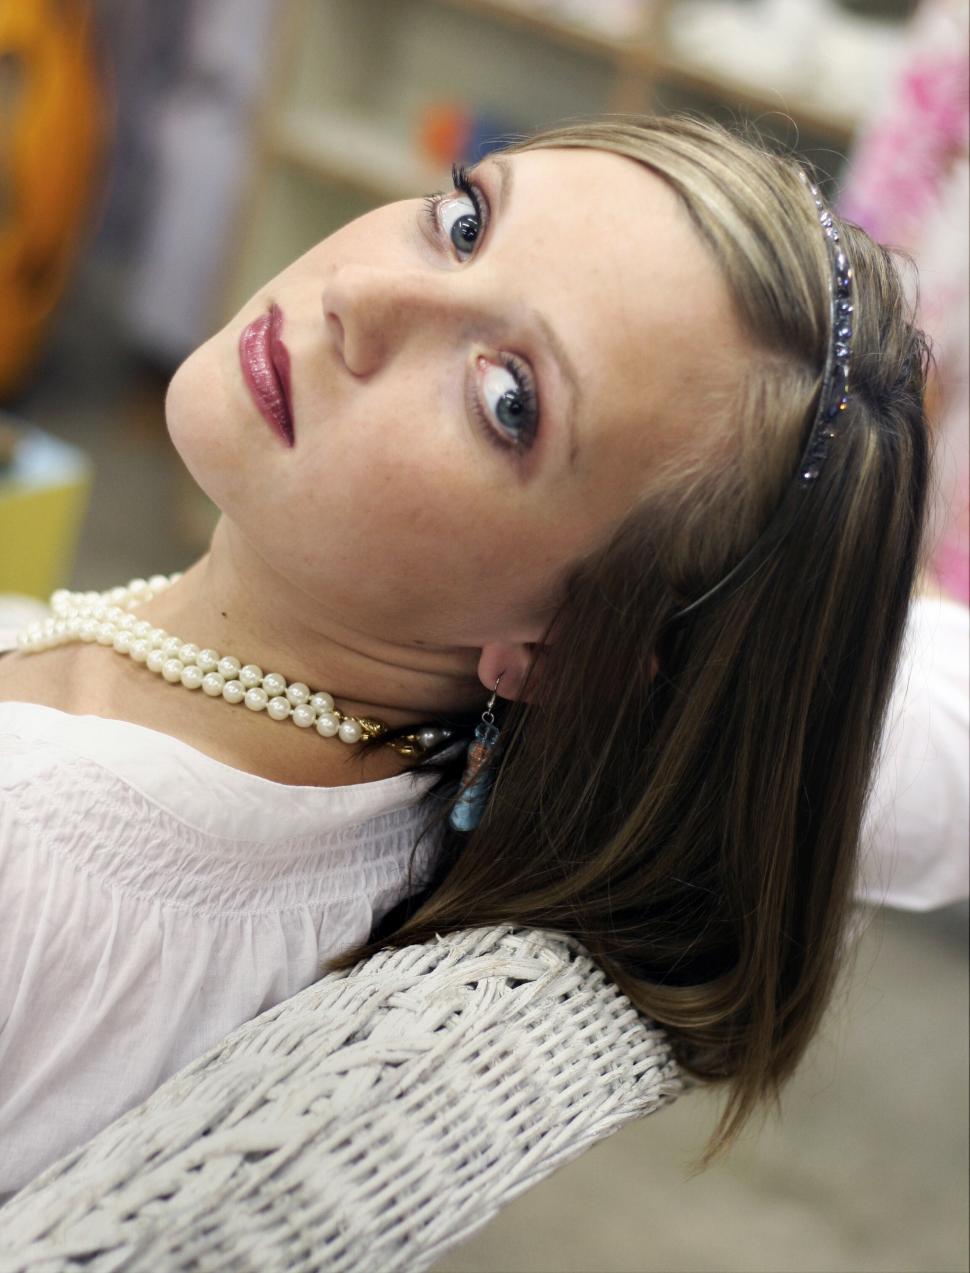 Free Image of Blurred girl wearing headband and pearls 